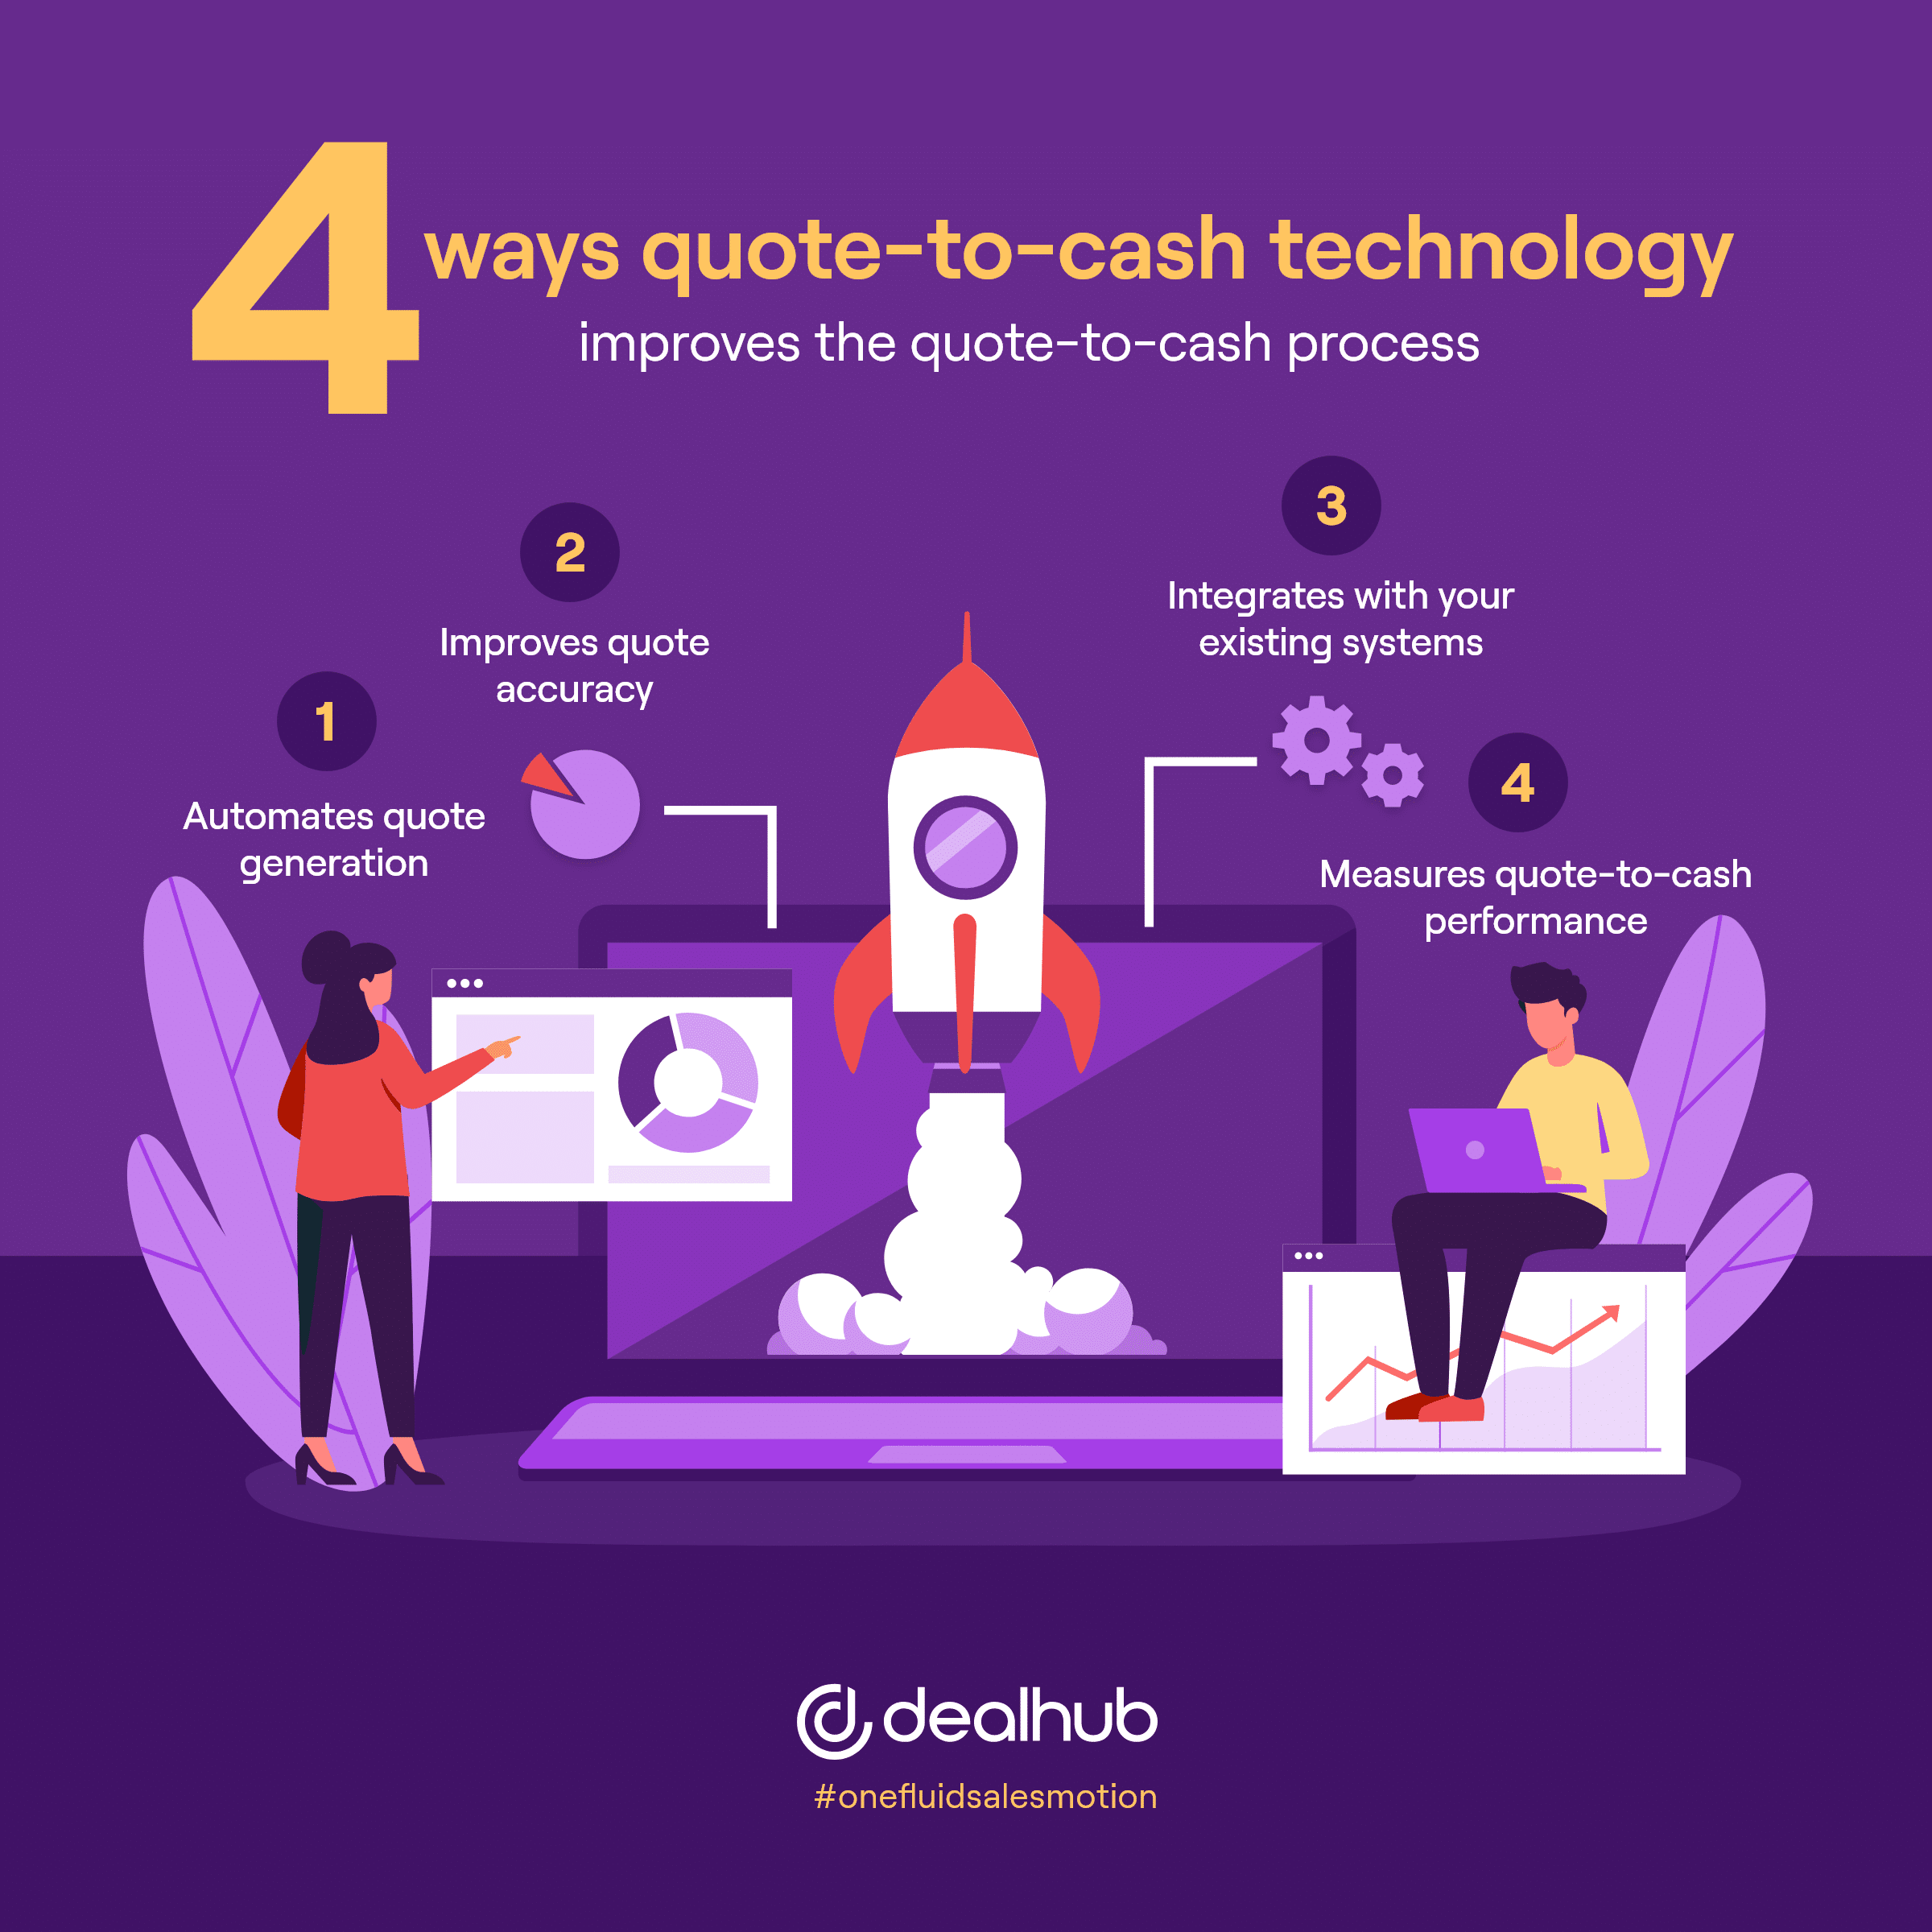 How to Streamline Quote-to-Cash with Technology